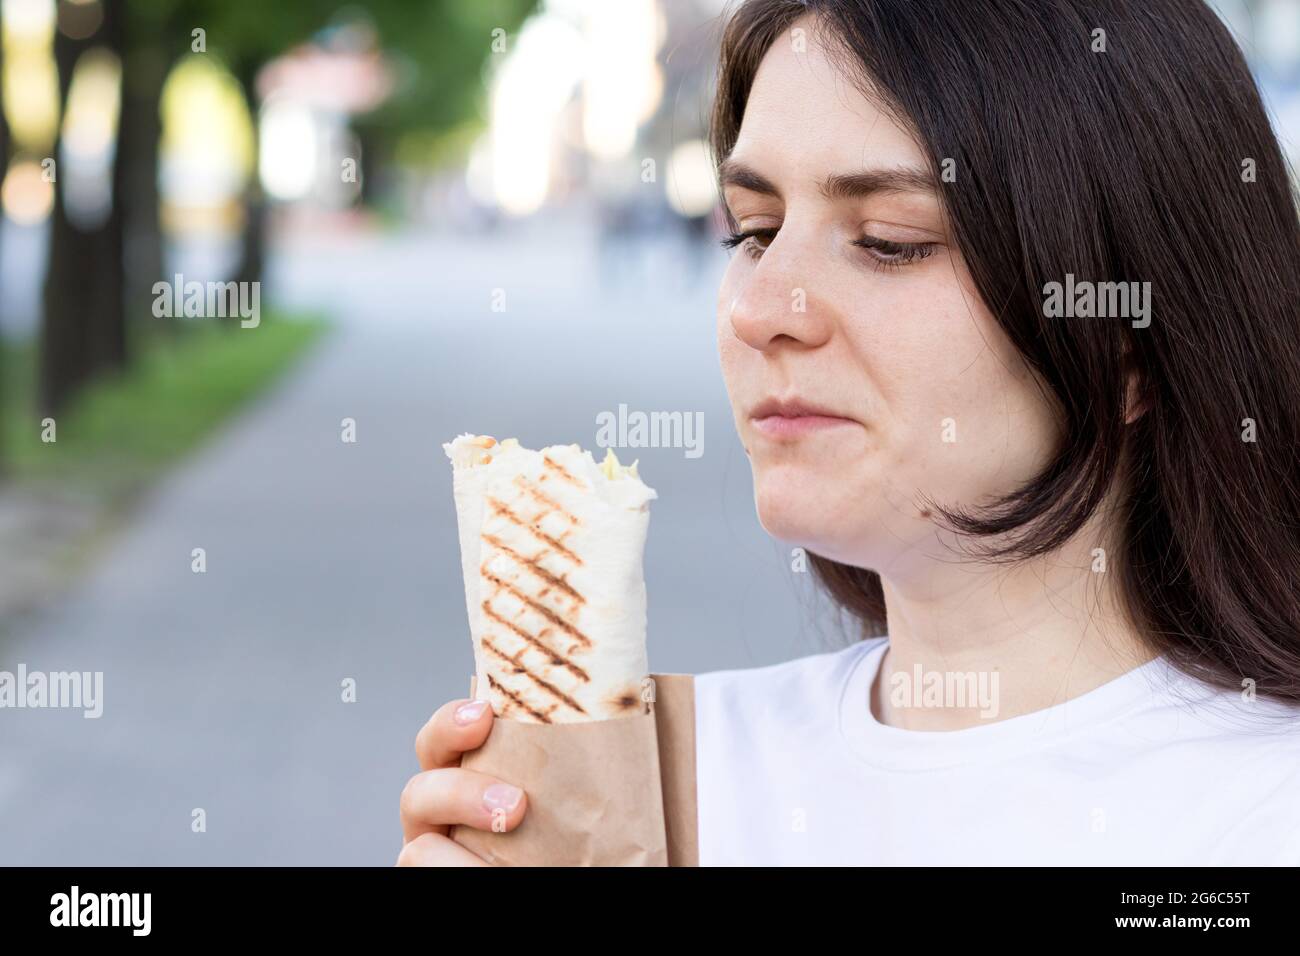 Brunette woman overeats shawarma on a city street. Street fast food pita roll with meat and vegetables. Stock Photo